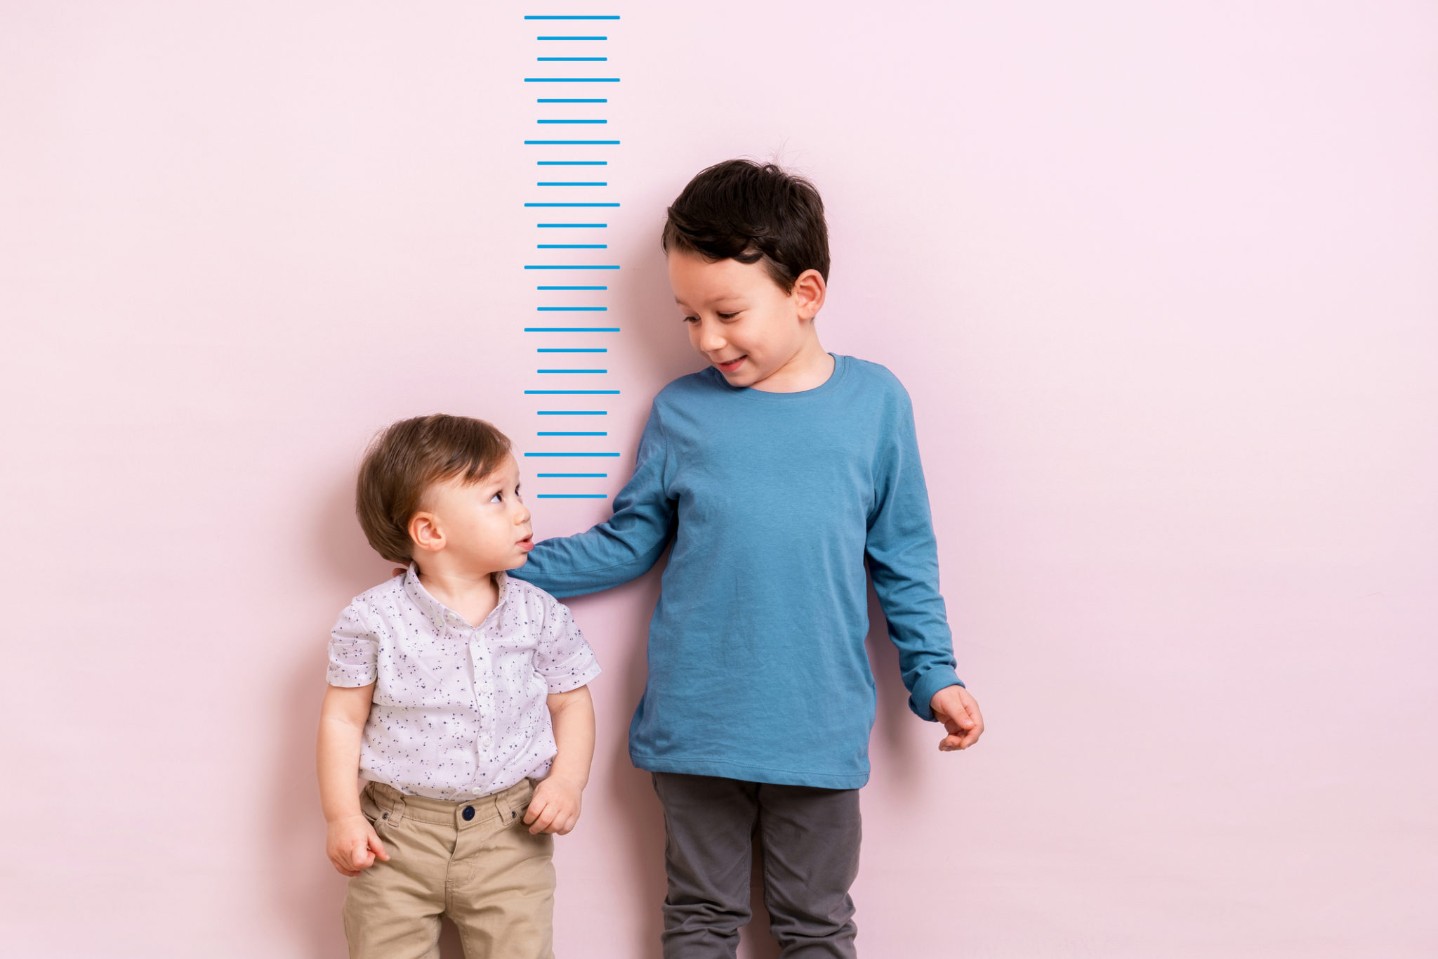 Child measuring his height